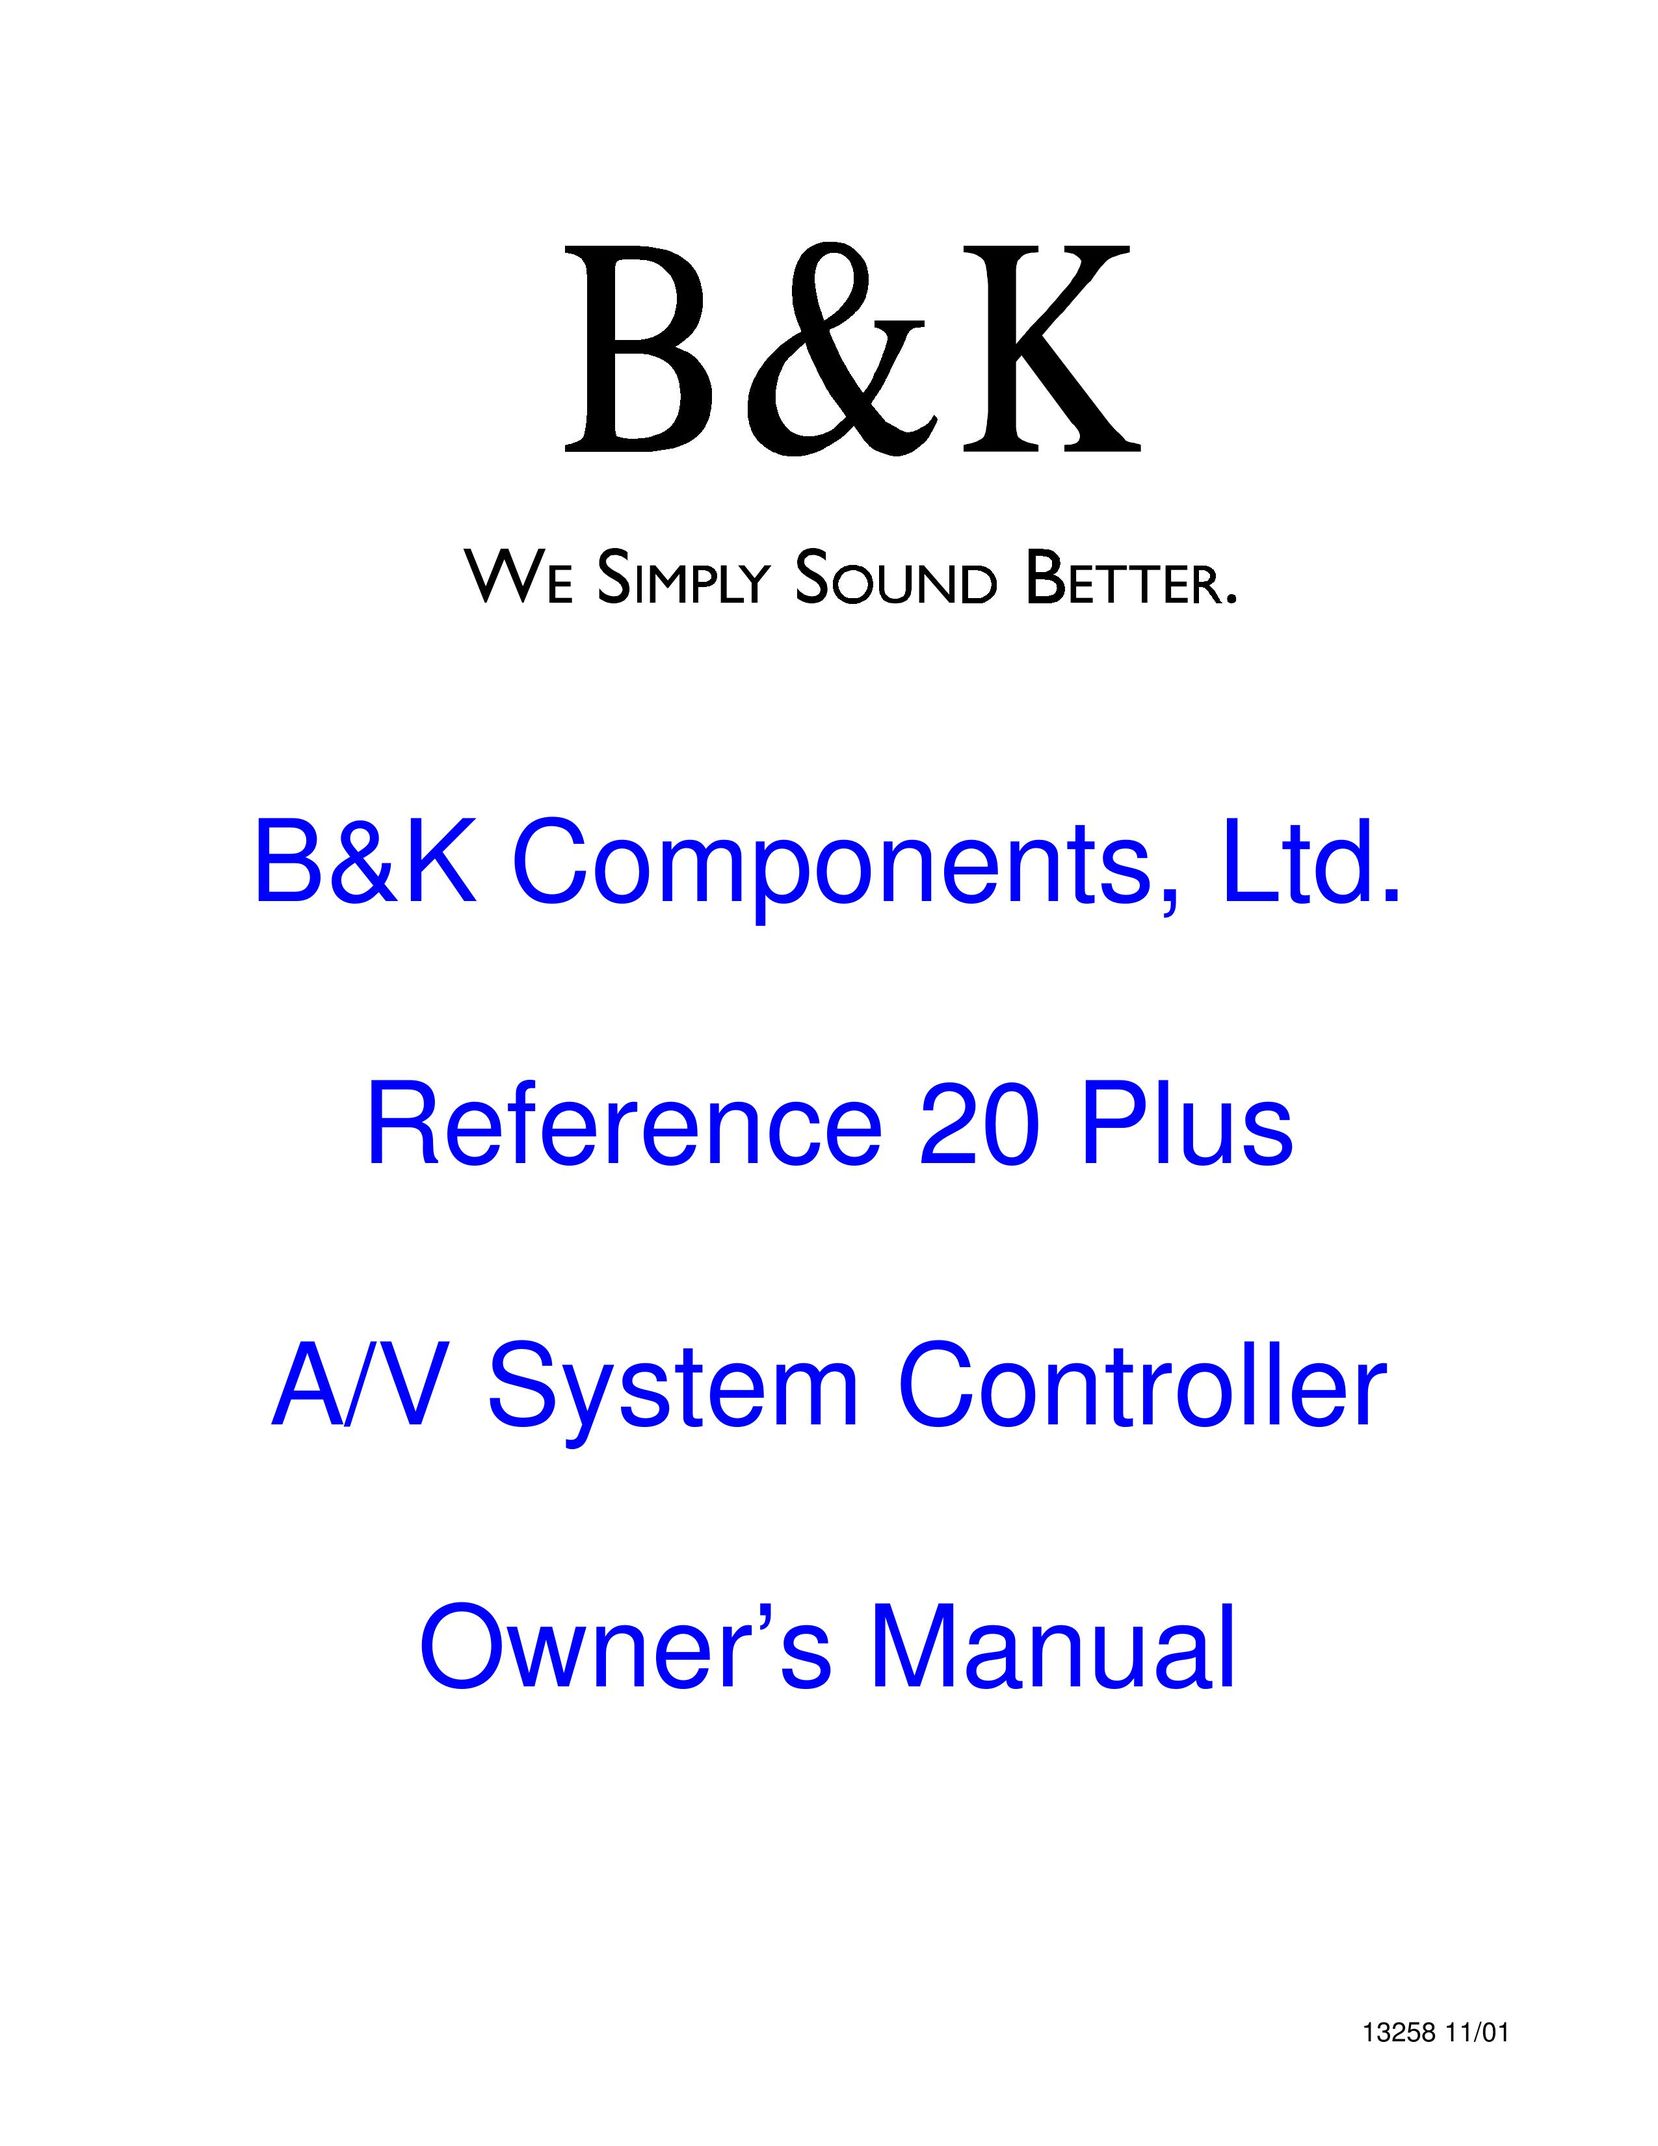 B&K Reference 20 Plus A/V System Controller Owner's Manual Stereo Receiver User Manual